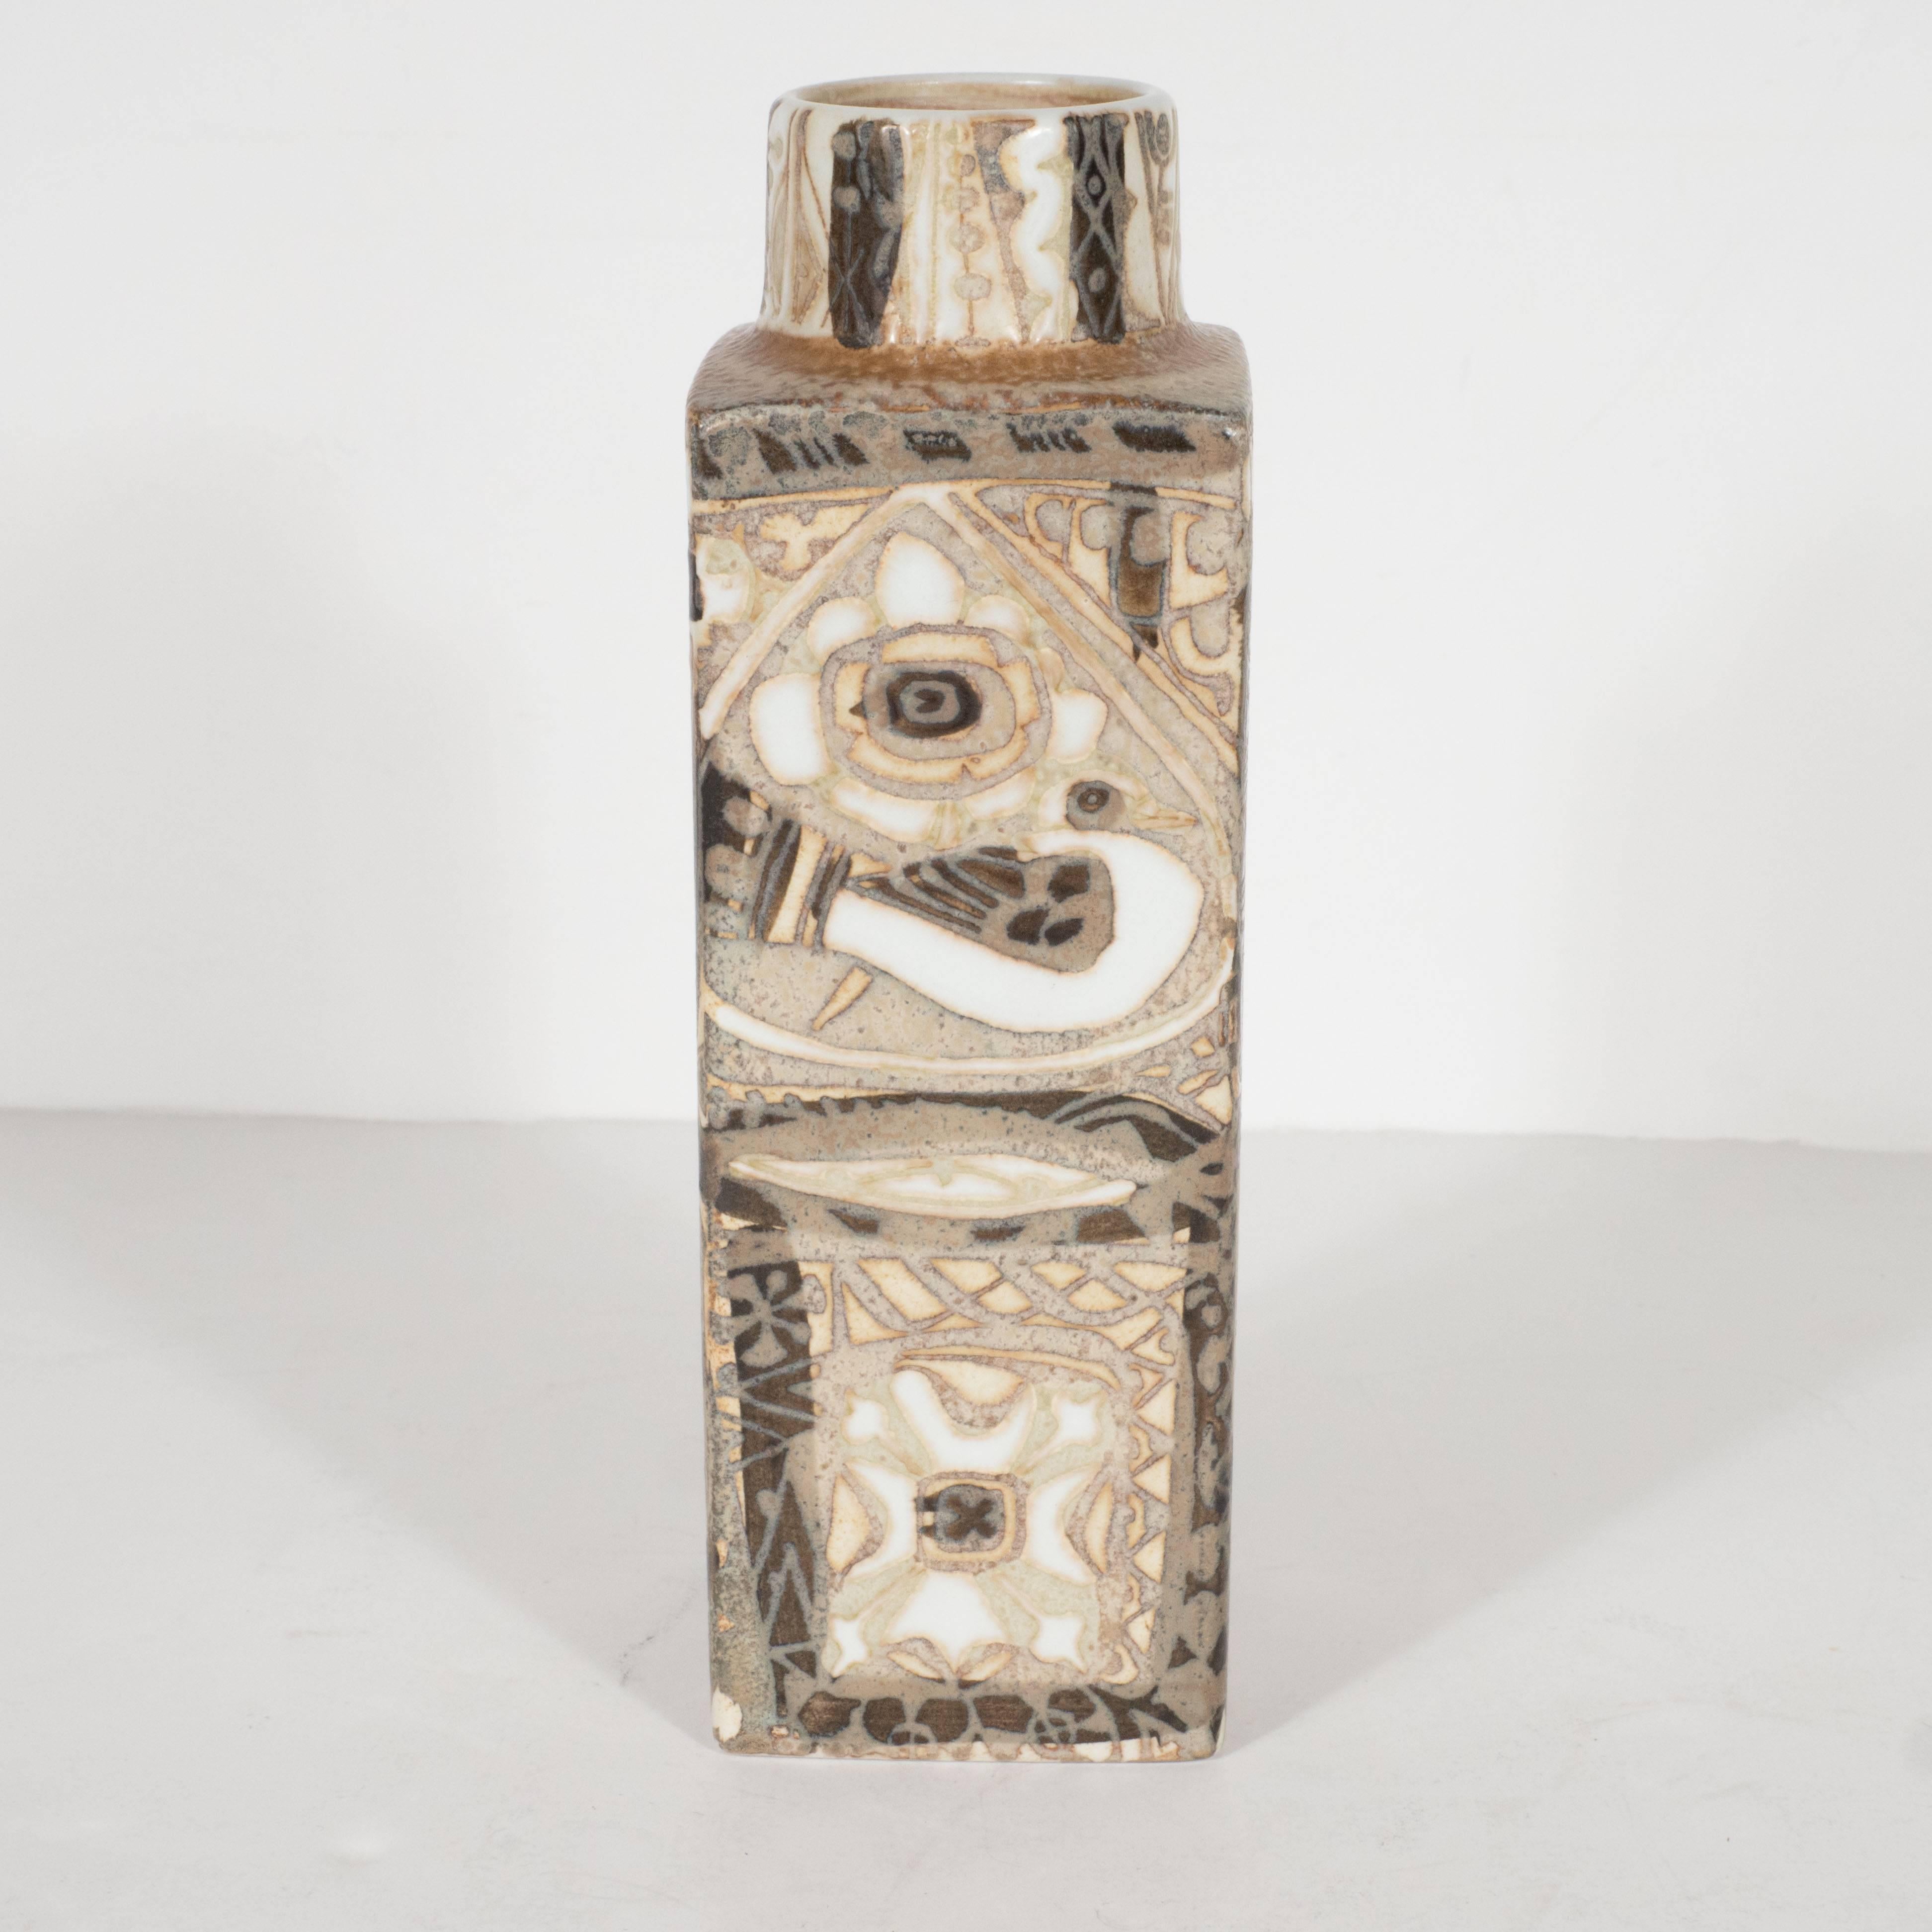 This beautiful hand-painted ceramic vase reads as a quintessentially Mid-Century Modernist piece, and a beautiful objet d'art in its own right. It features complex abstract geometric patterns throughout, as well as stylized scorpionfish in hues of